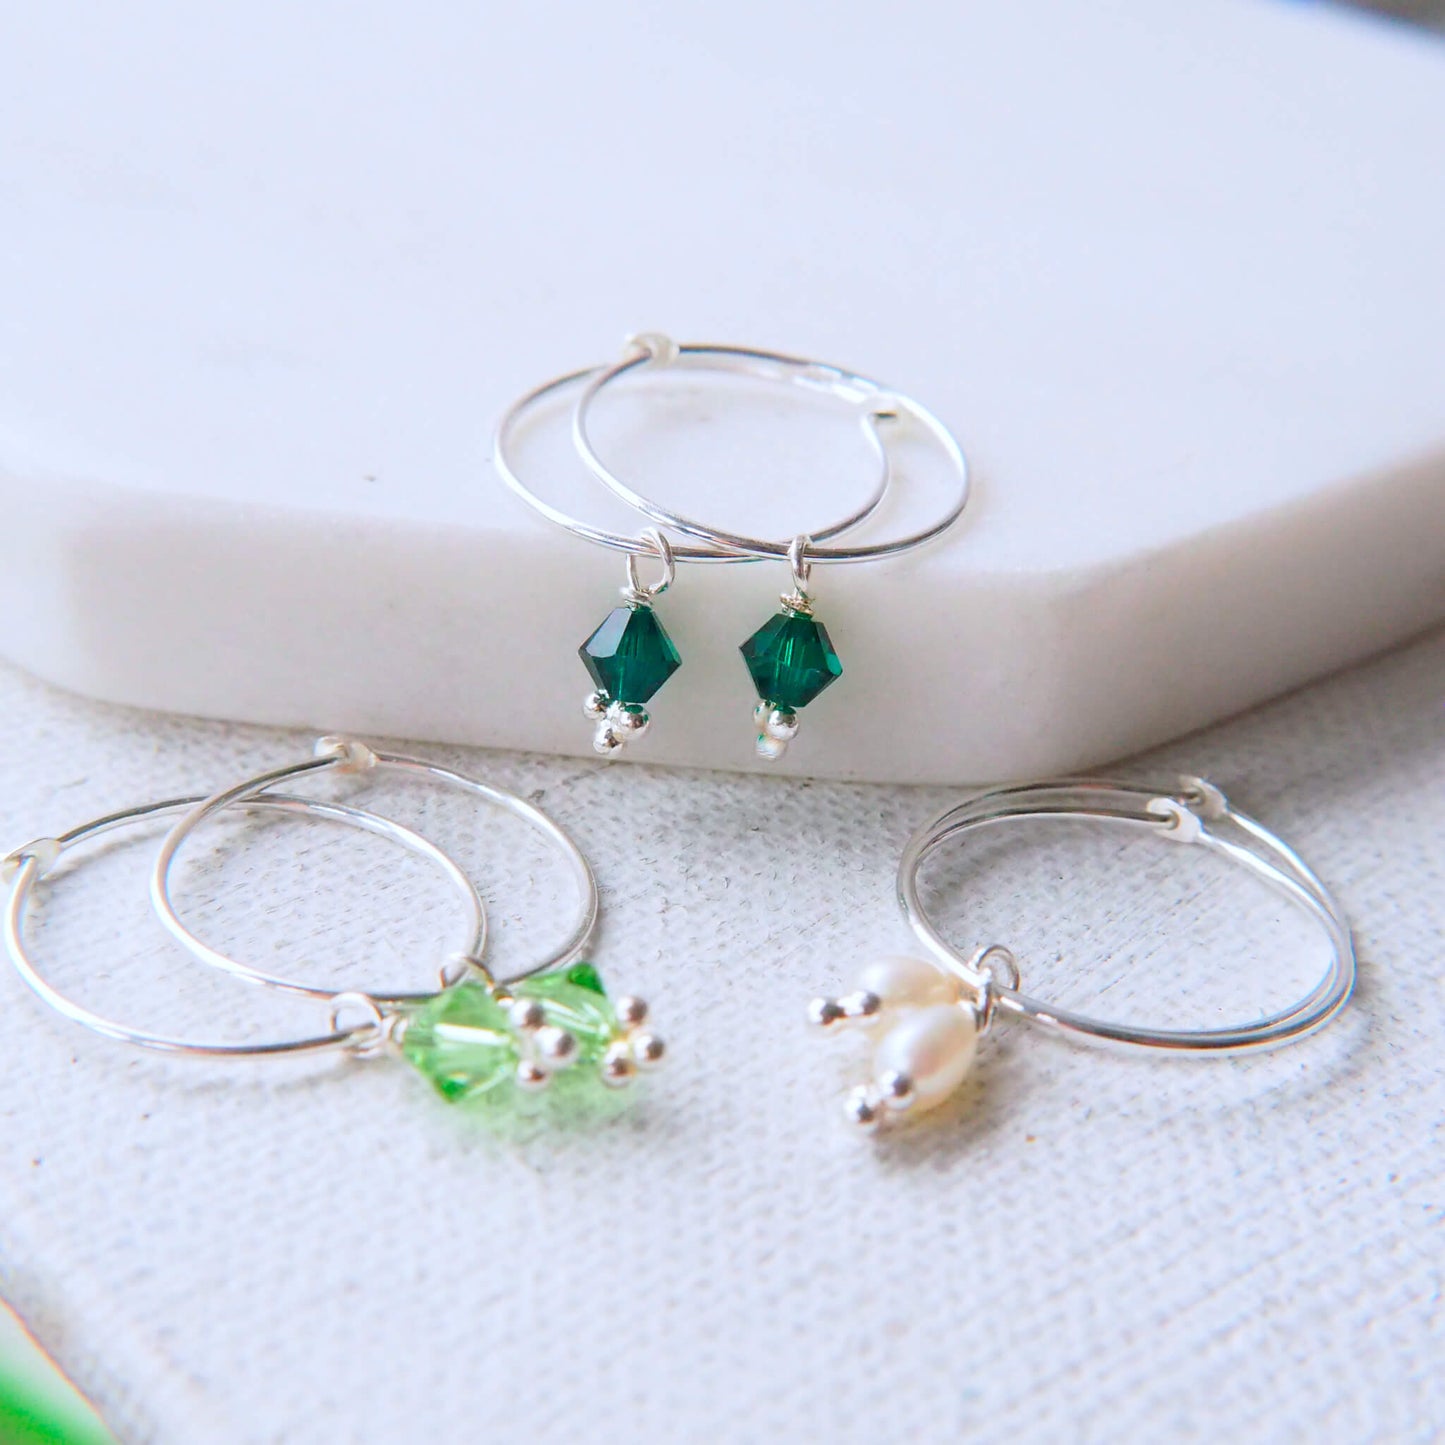 Birthstone hoops with wire hoops and a birthstone crystal pictured on a white marble background with May Emerald, August Peridot and June Pearl variations. Handmade by maram jewellery in Scotland